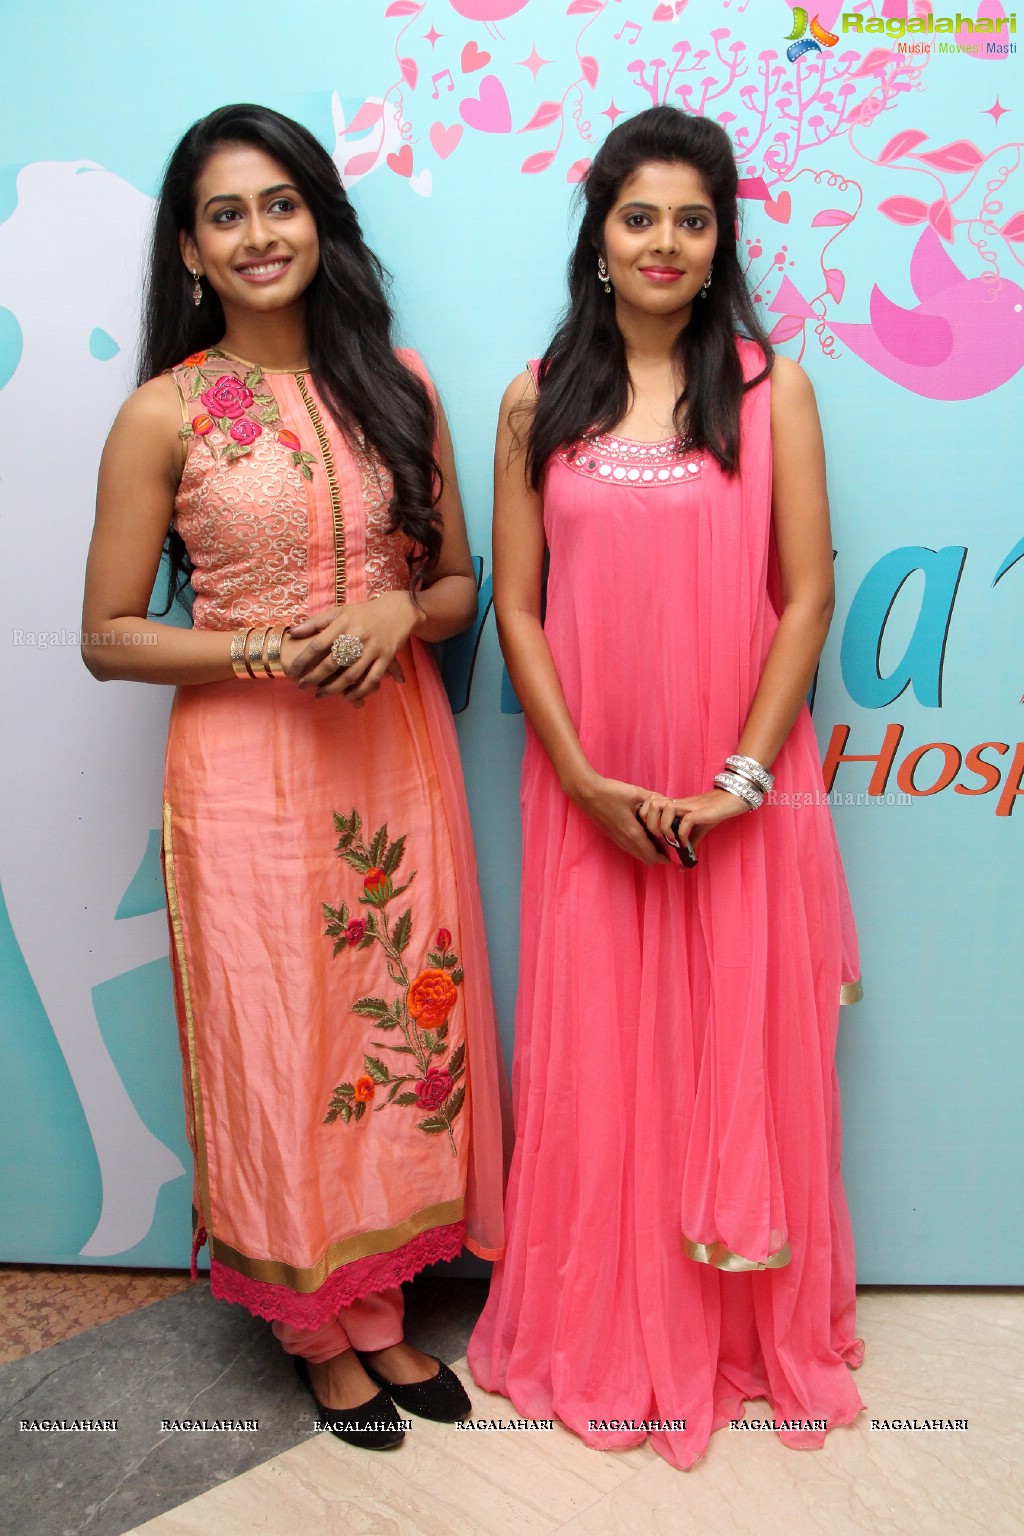 Breast Cancer Awareness Program by Omega Hospitals at Inorbit Mall, Hyderabad